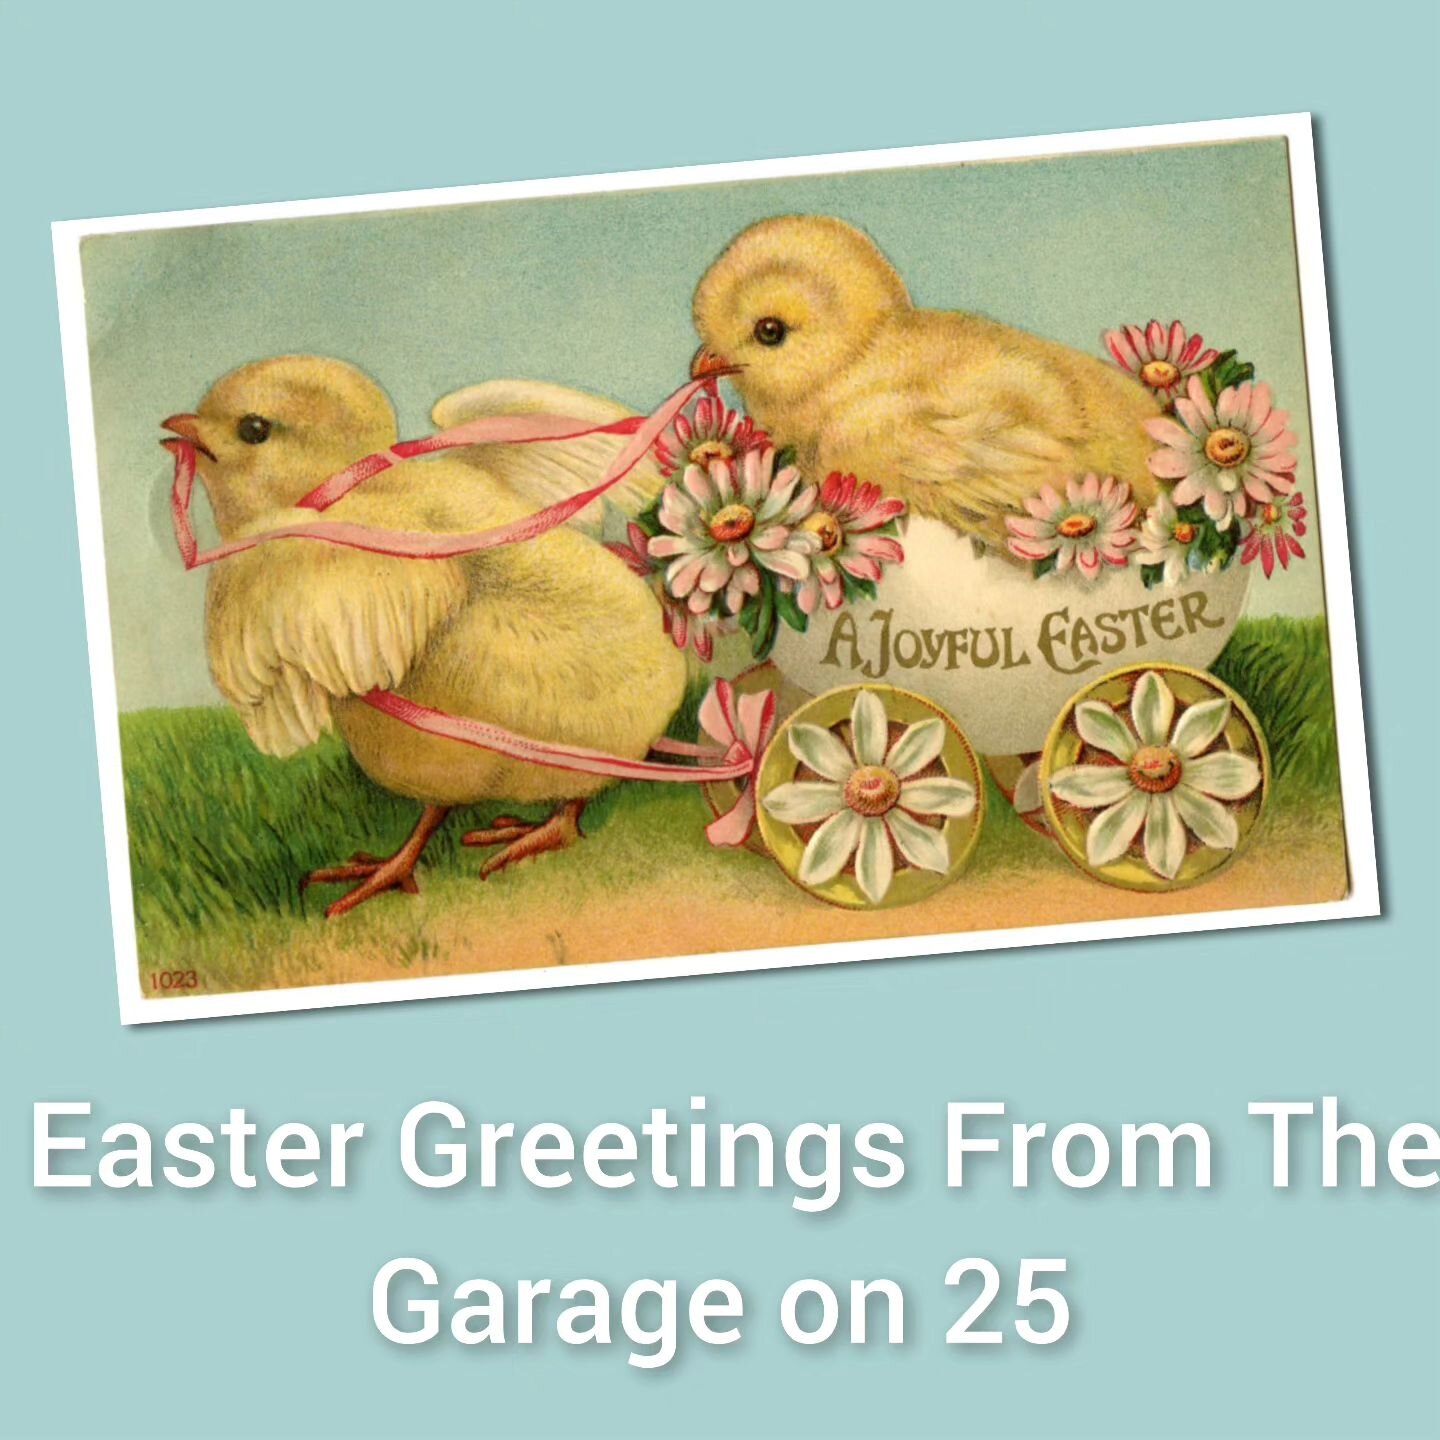 The Garage on 25 will be closed Sunday, March 31, 2024 in observance of Easter. Wishing everyone a beautiful day to share with family and friends.
The shop will be back open on Tues, April 2nd.